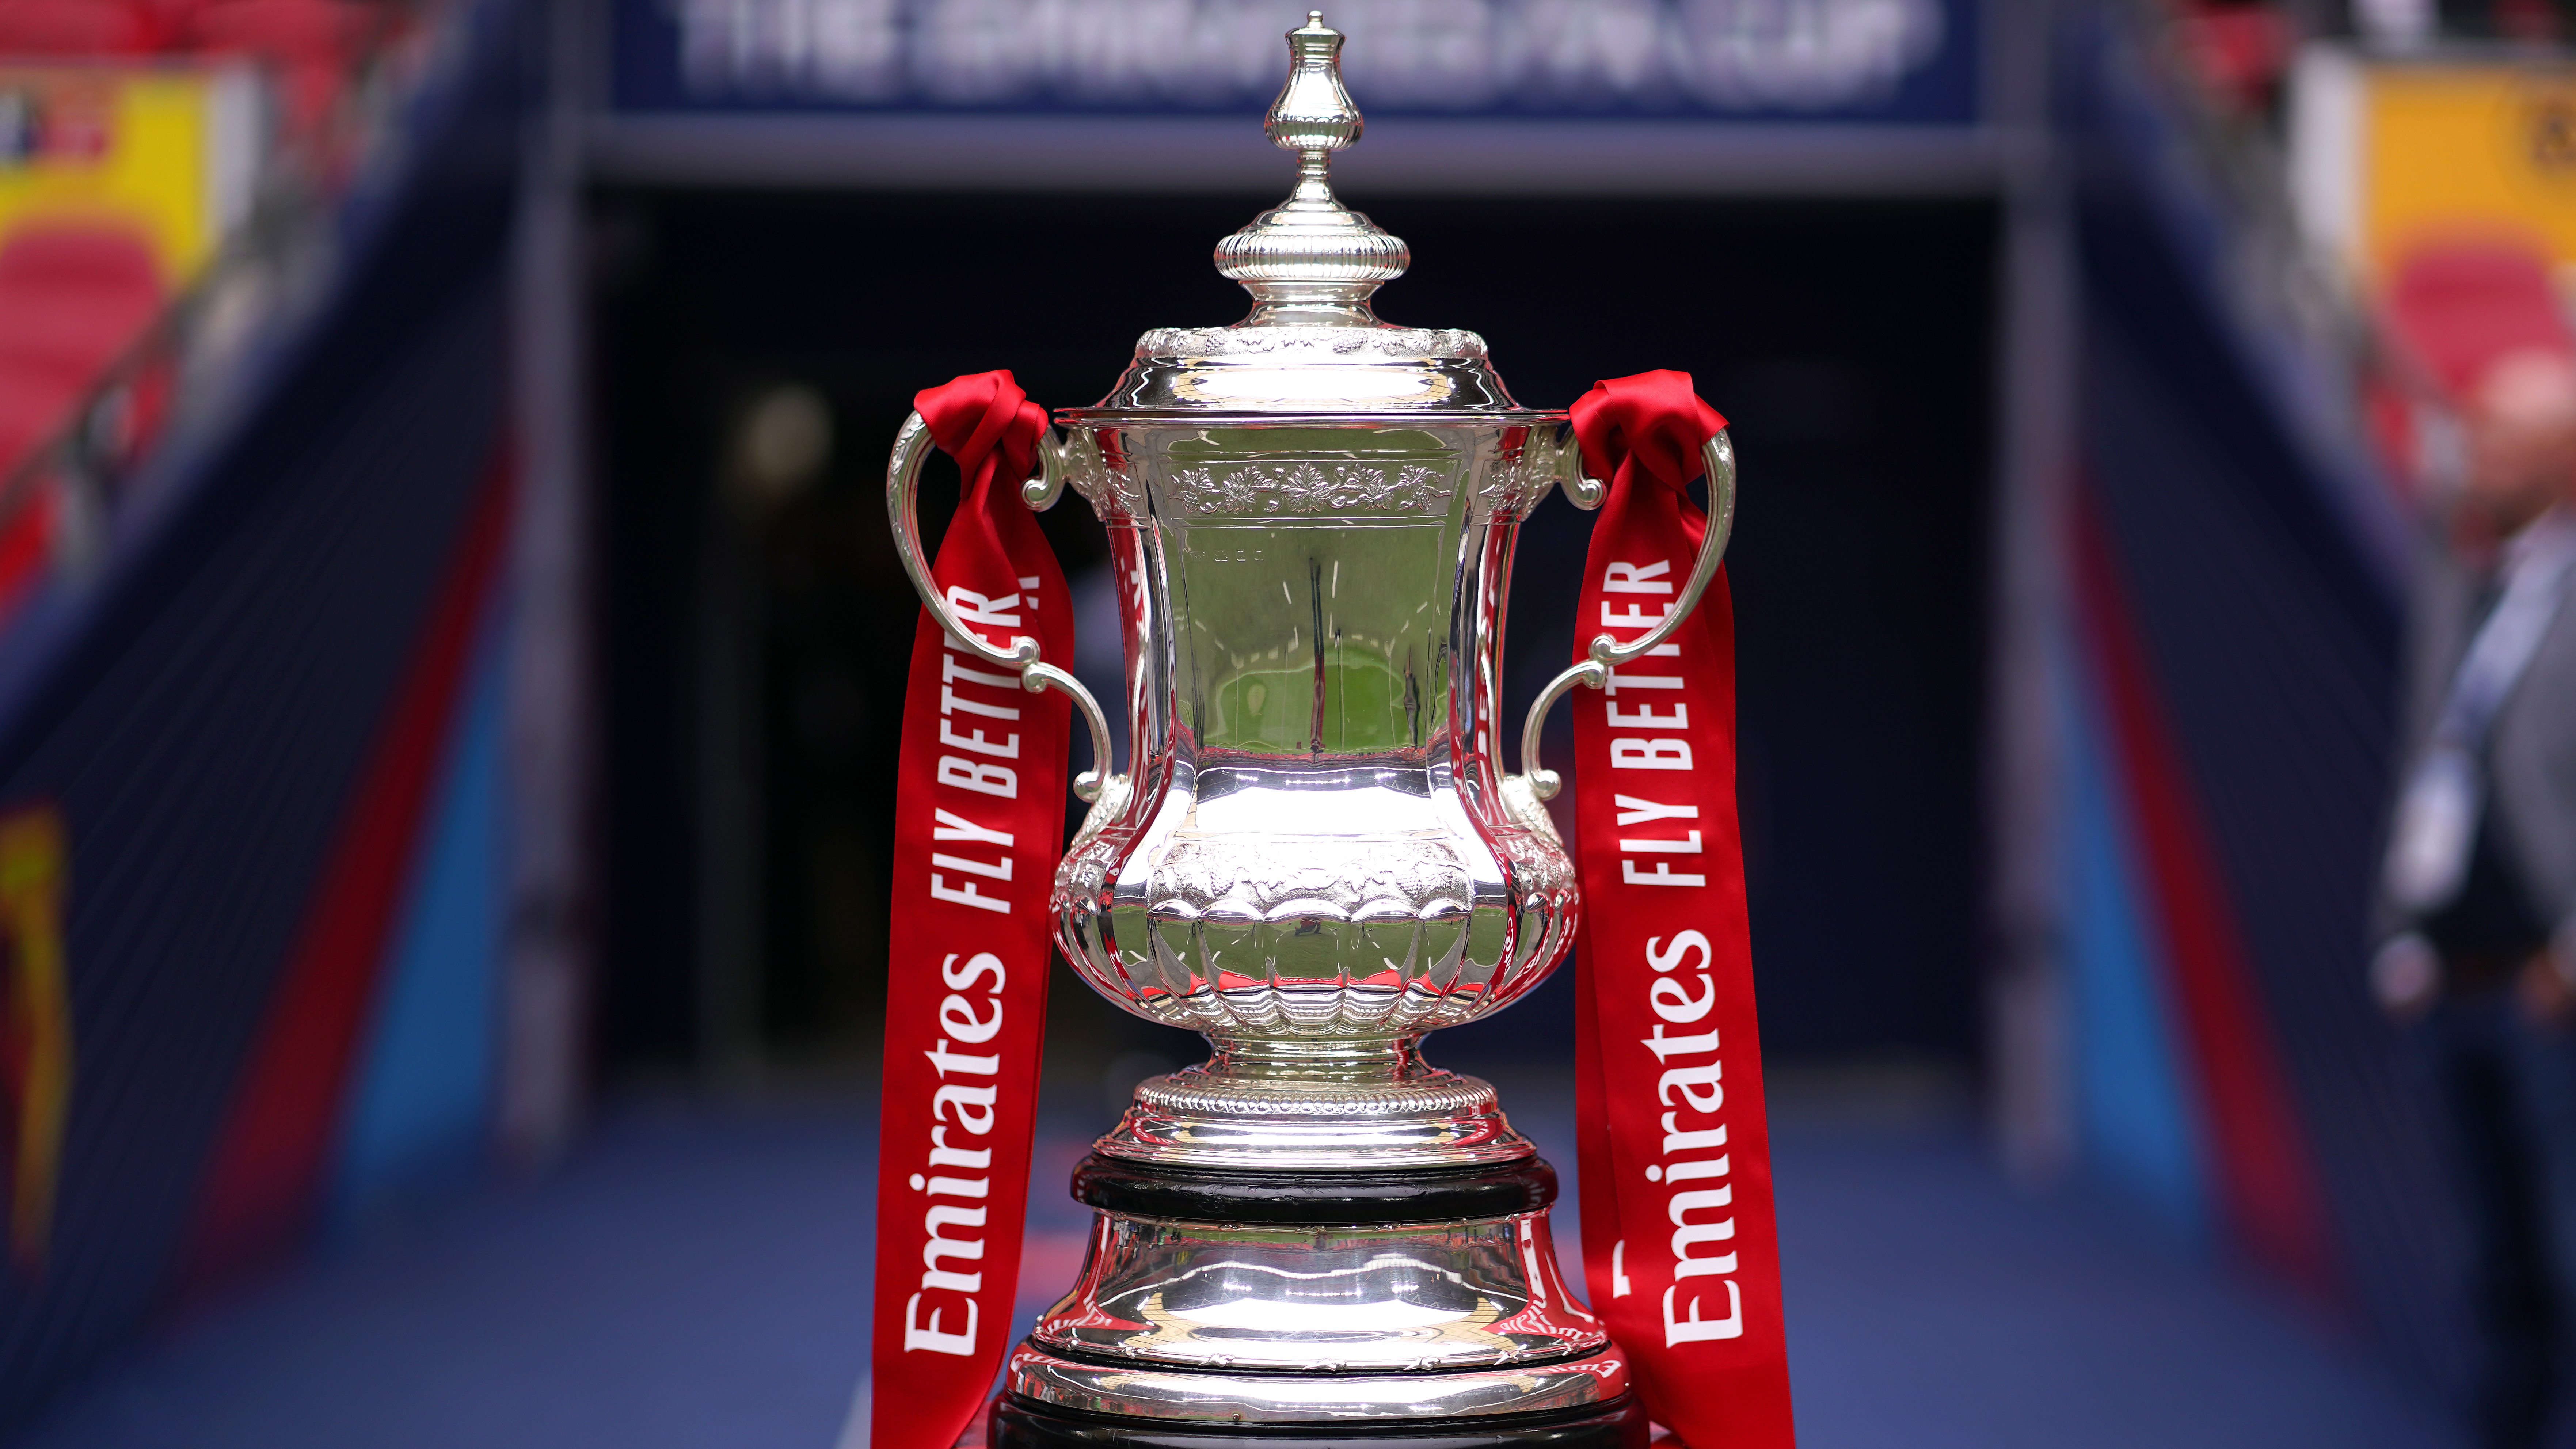 Swansea City to face Nottingham Forest in FA Cup fourth round Swansea